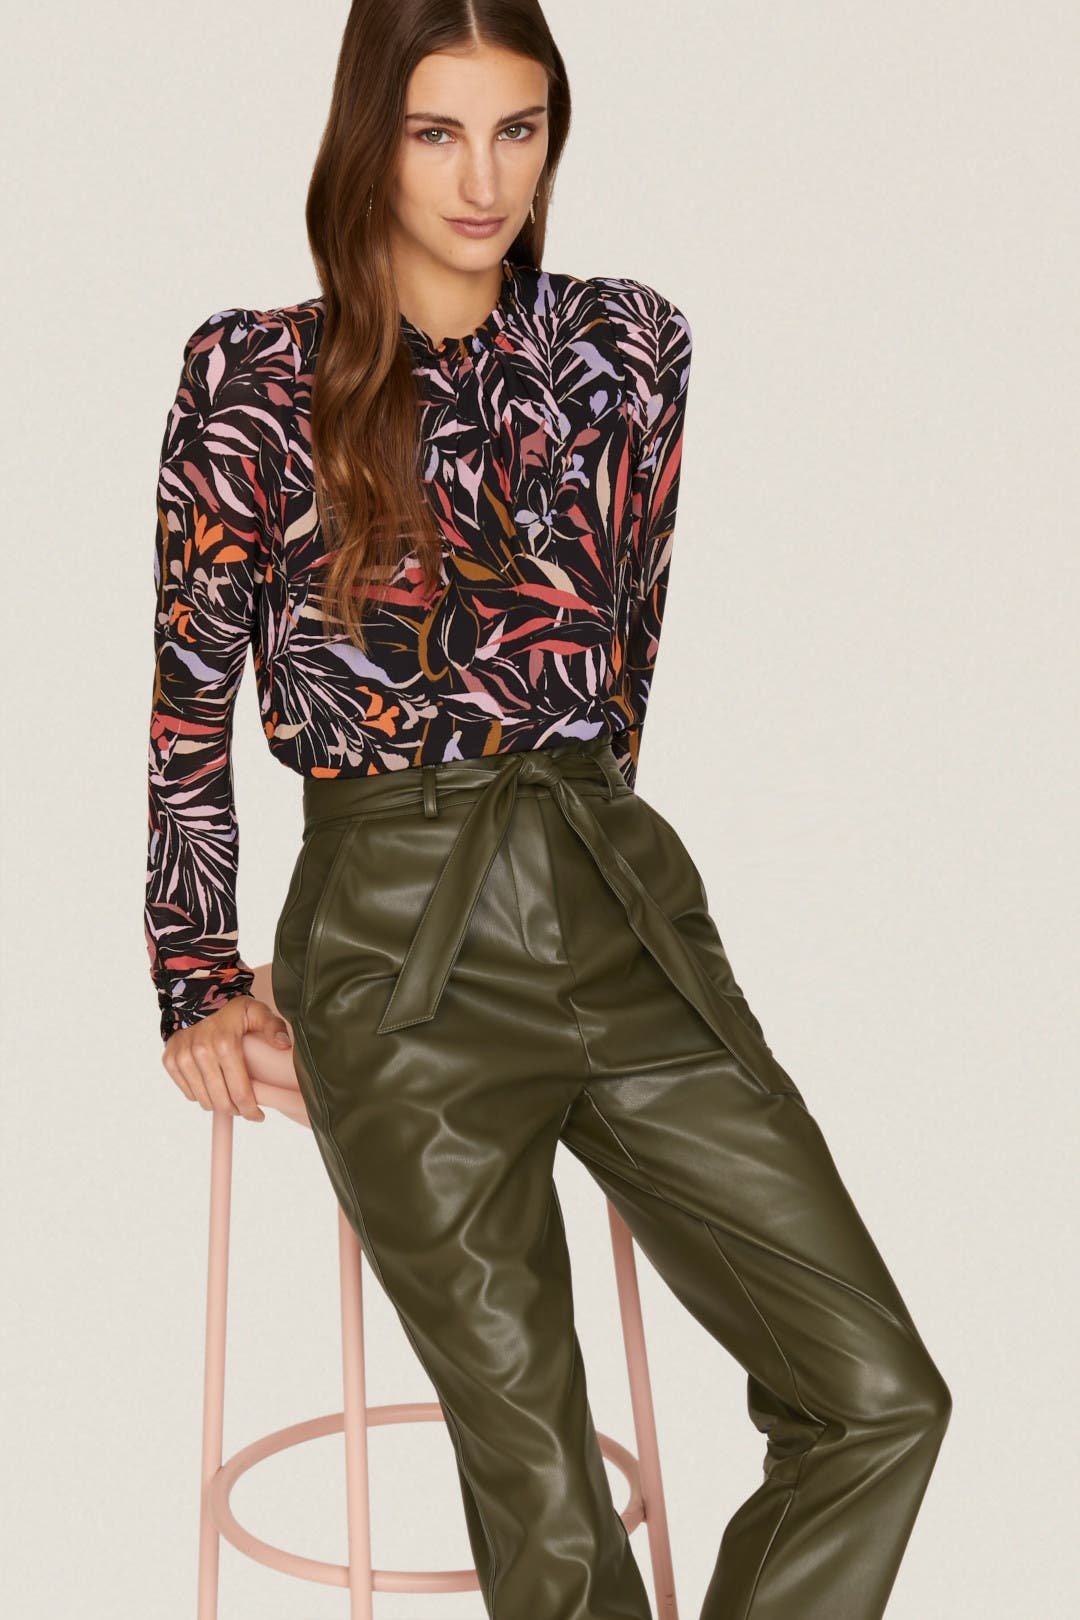 floral top and leather pants peter som fall fashion